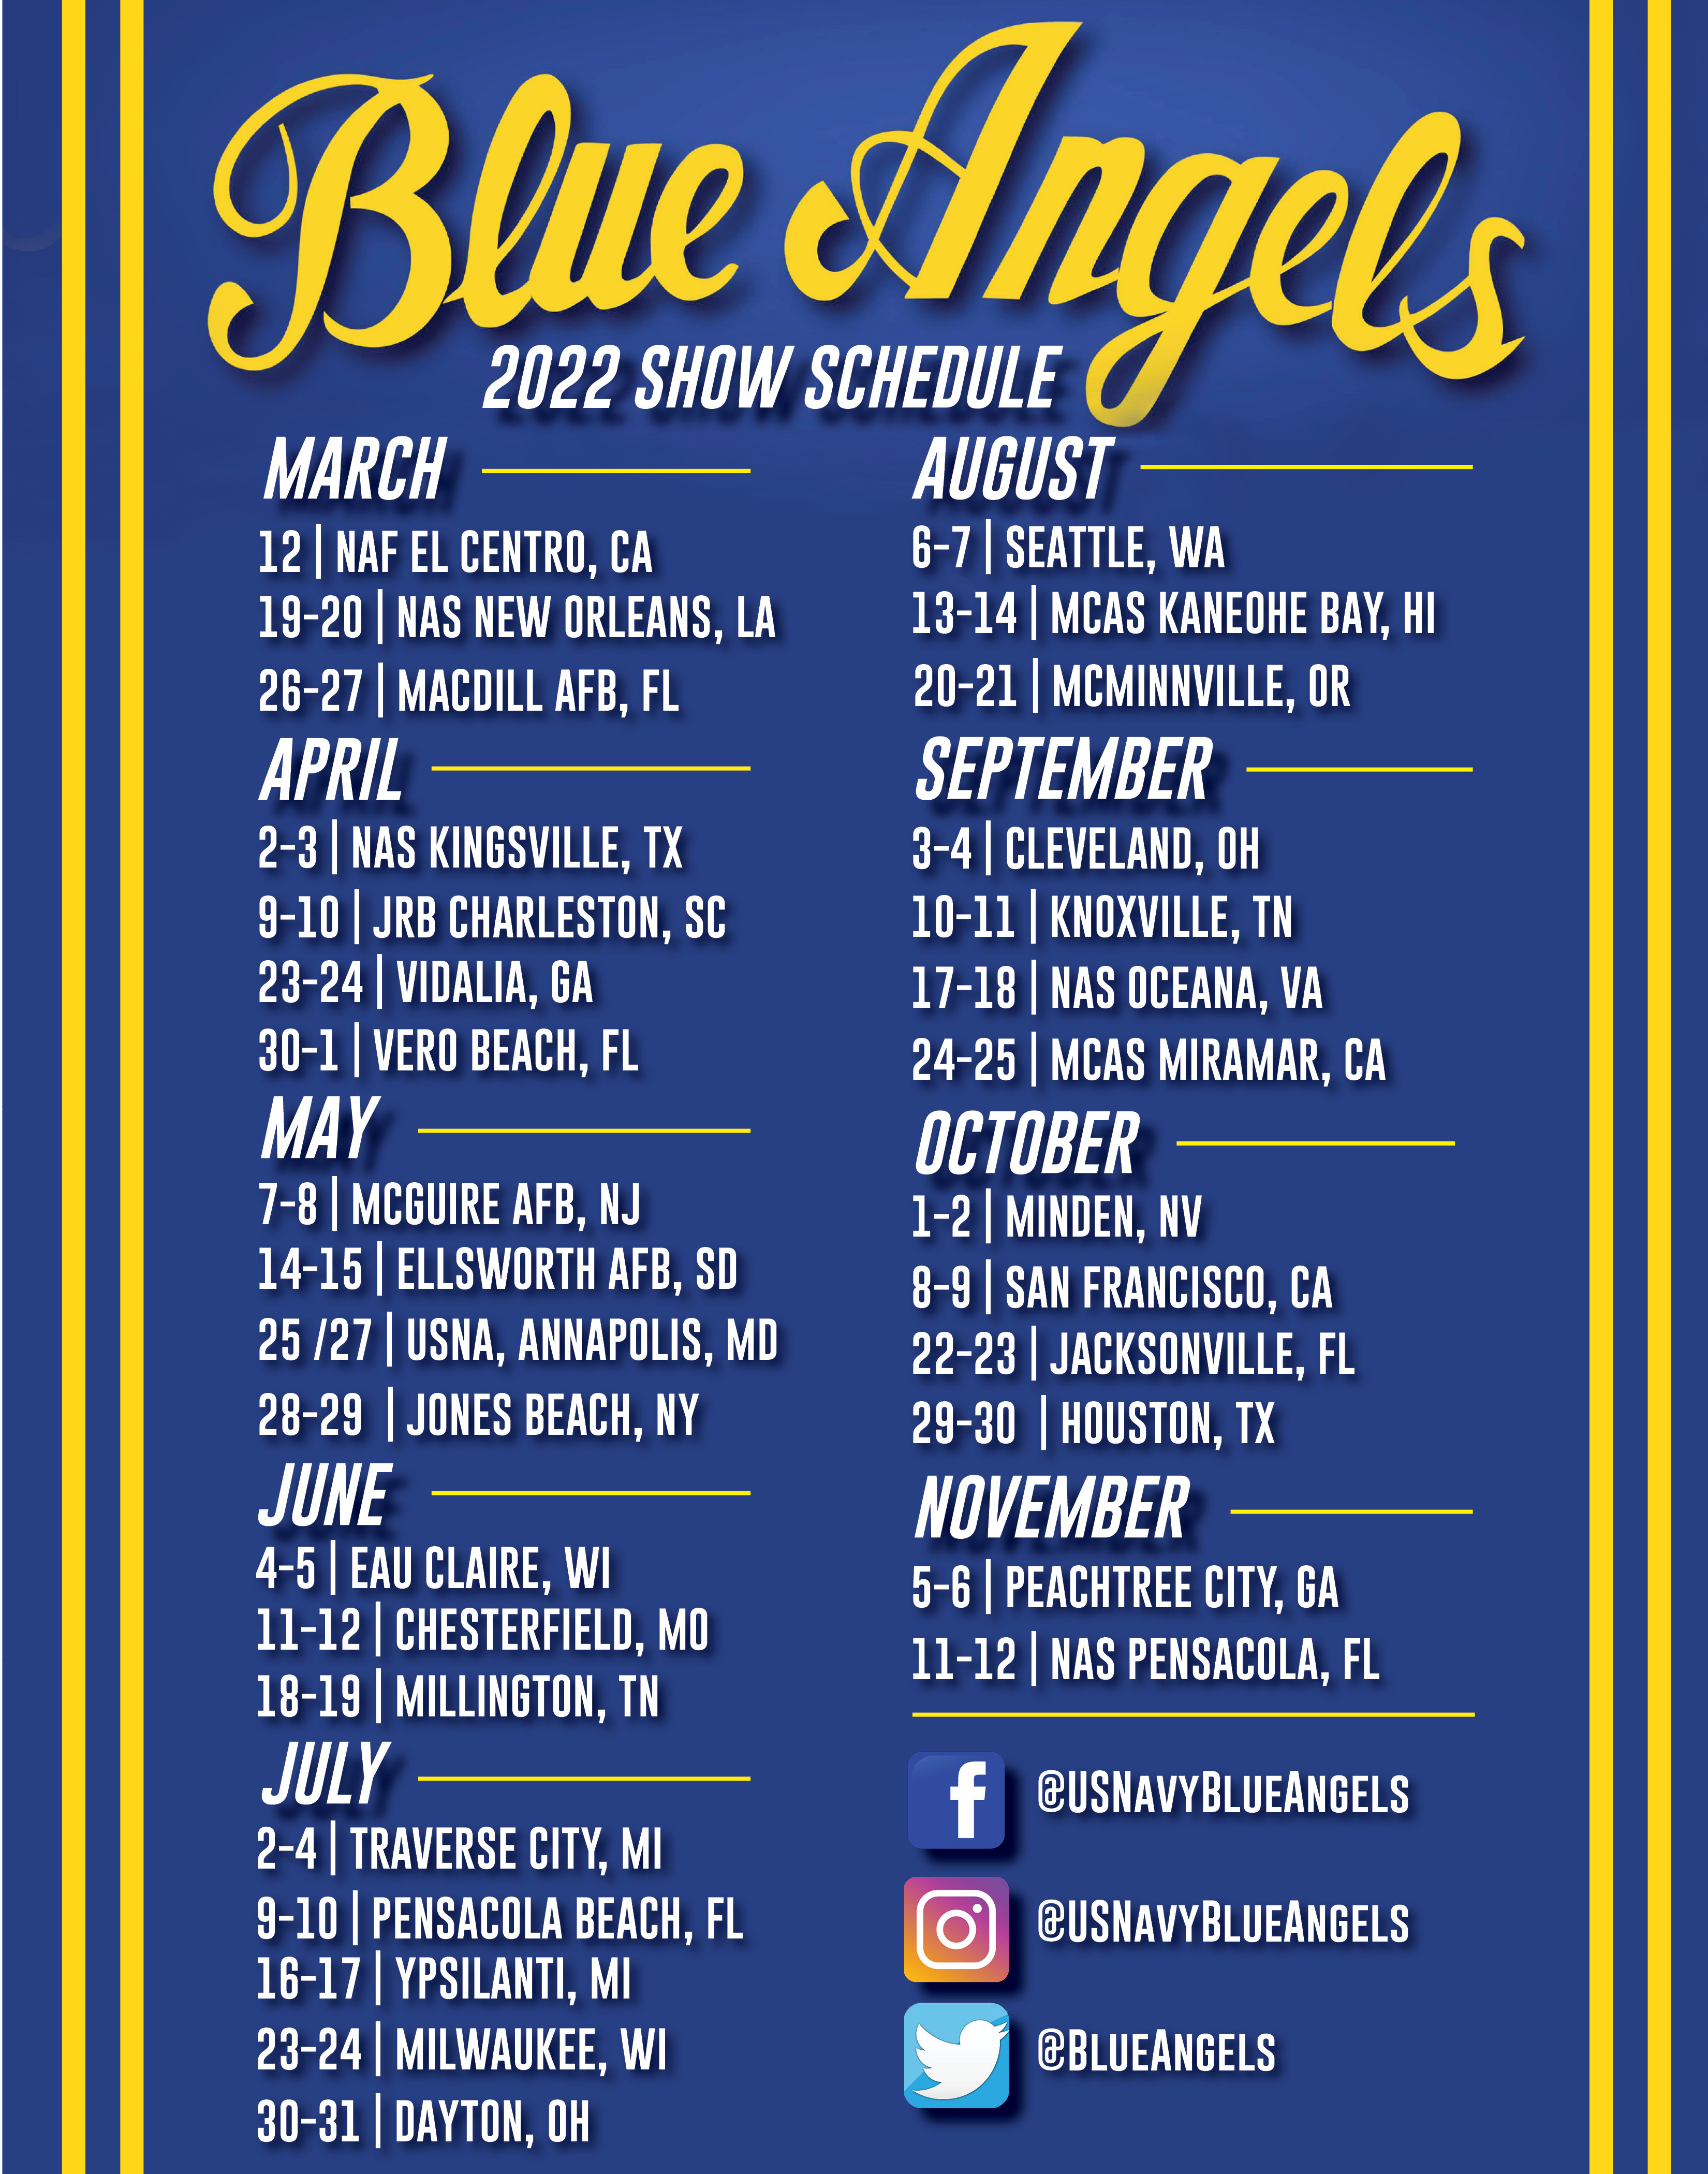 Blue Angels Release 2022 Air Show Schedule > United States Navy > Display-Press Releases” loading=”lazy” style=”width:100%;text-align:center;” /><small style=